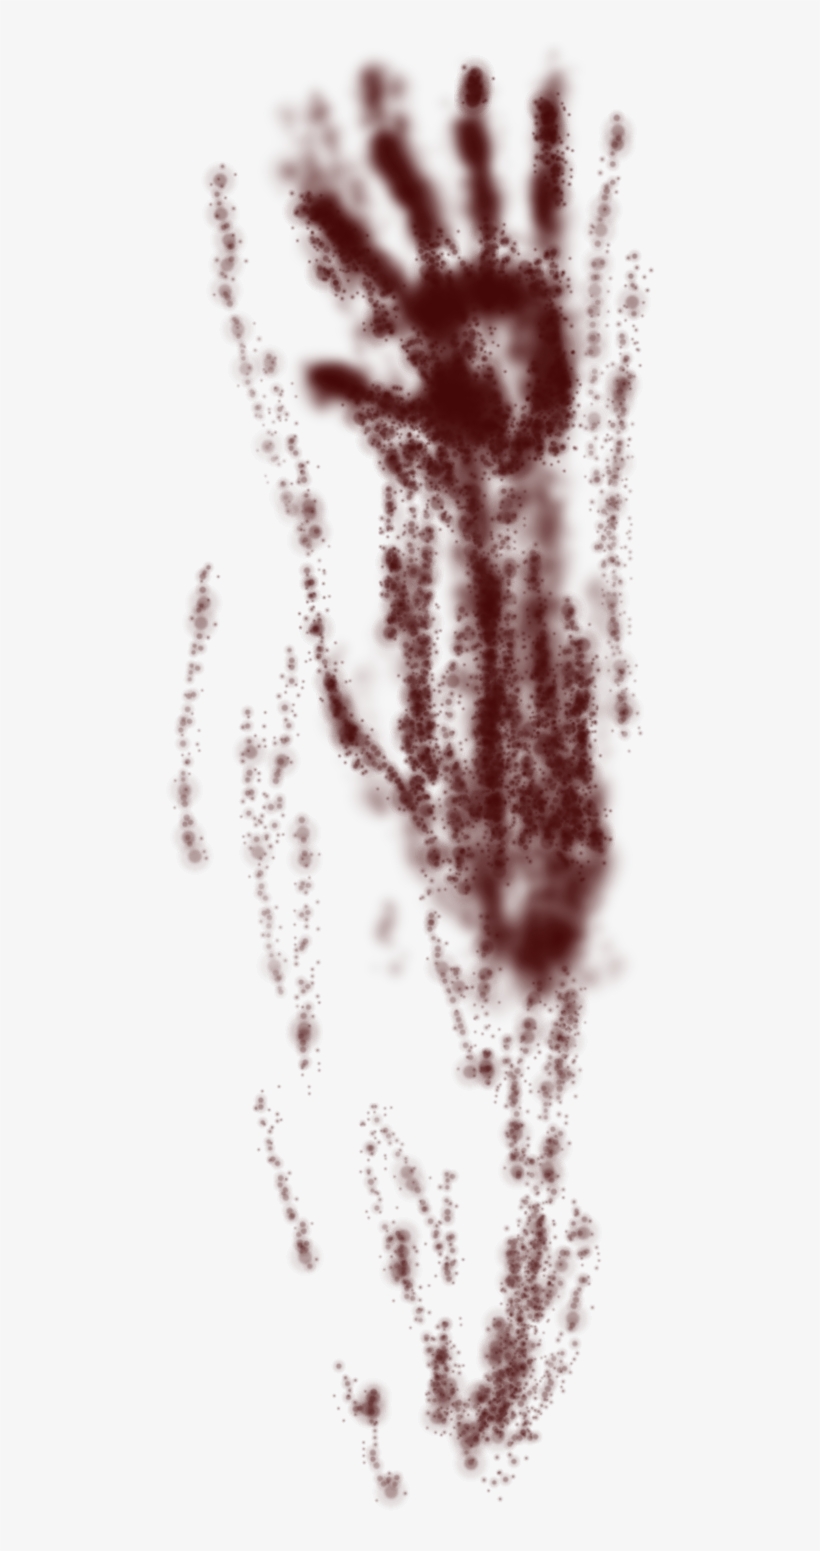 Bloody Handprint Smear Png For Kids - Awkward Zombie, transparent png #252631